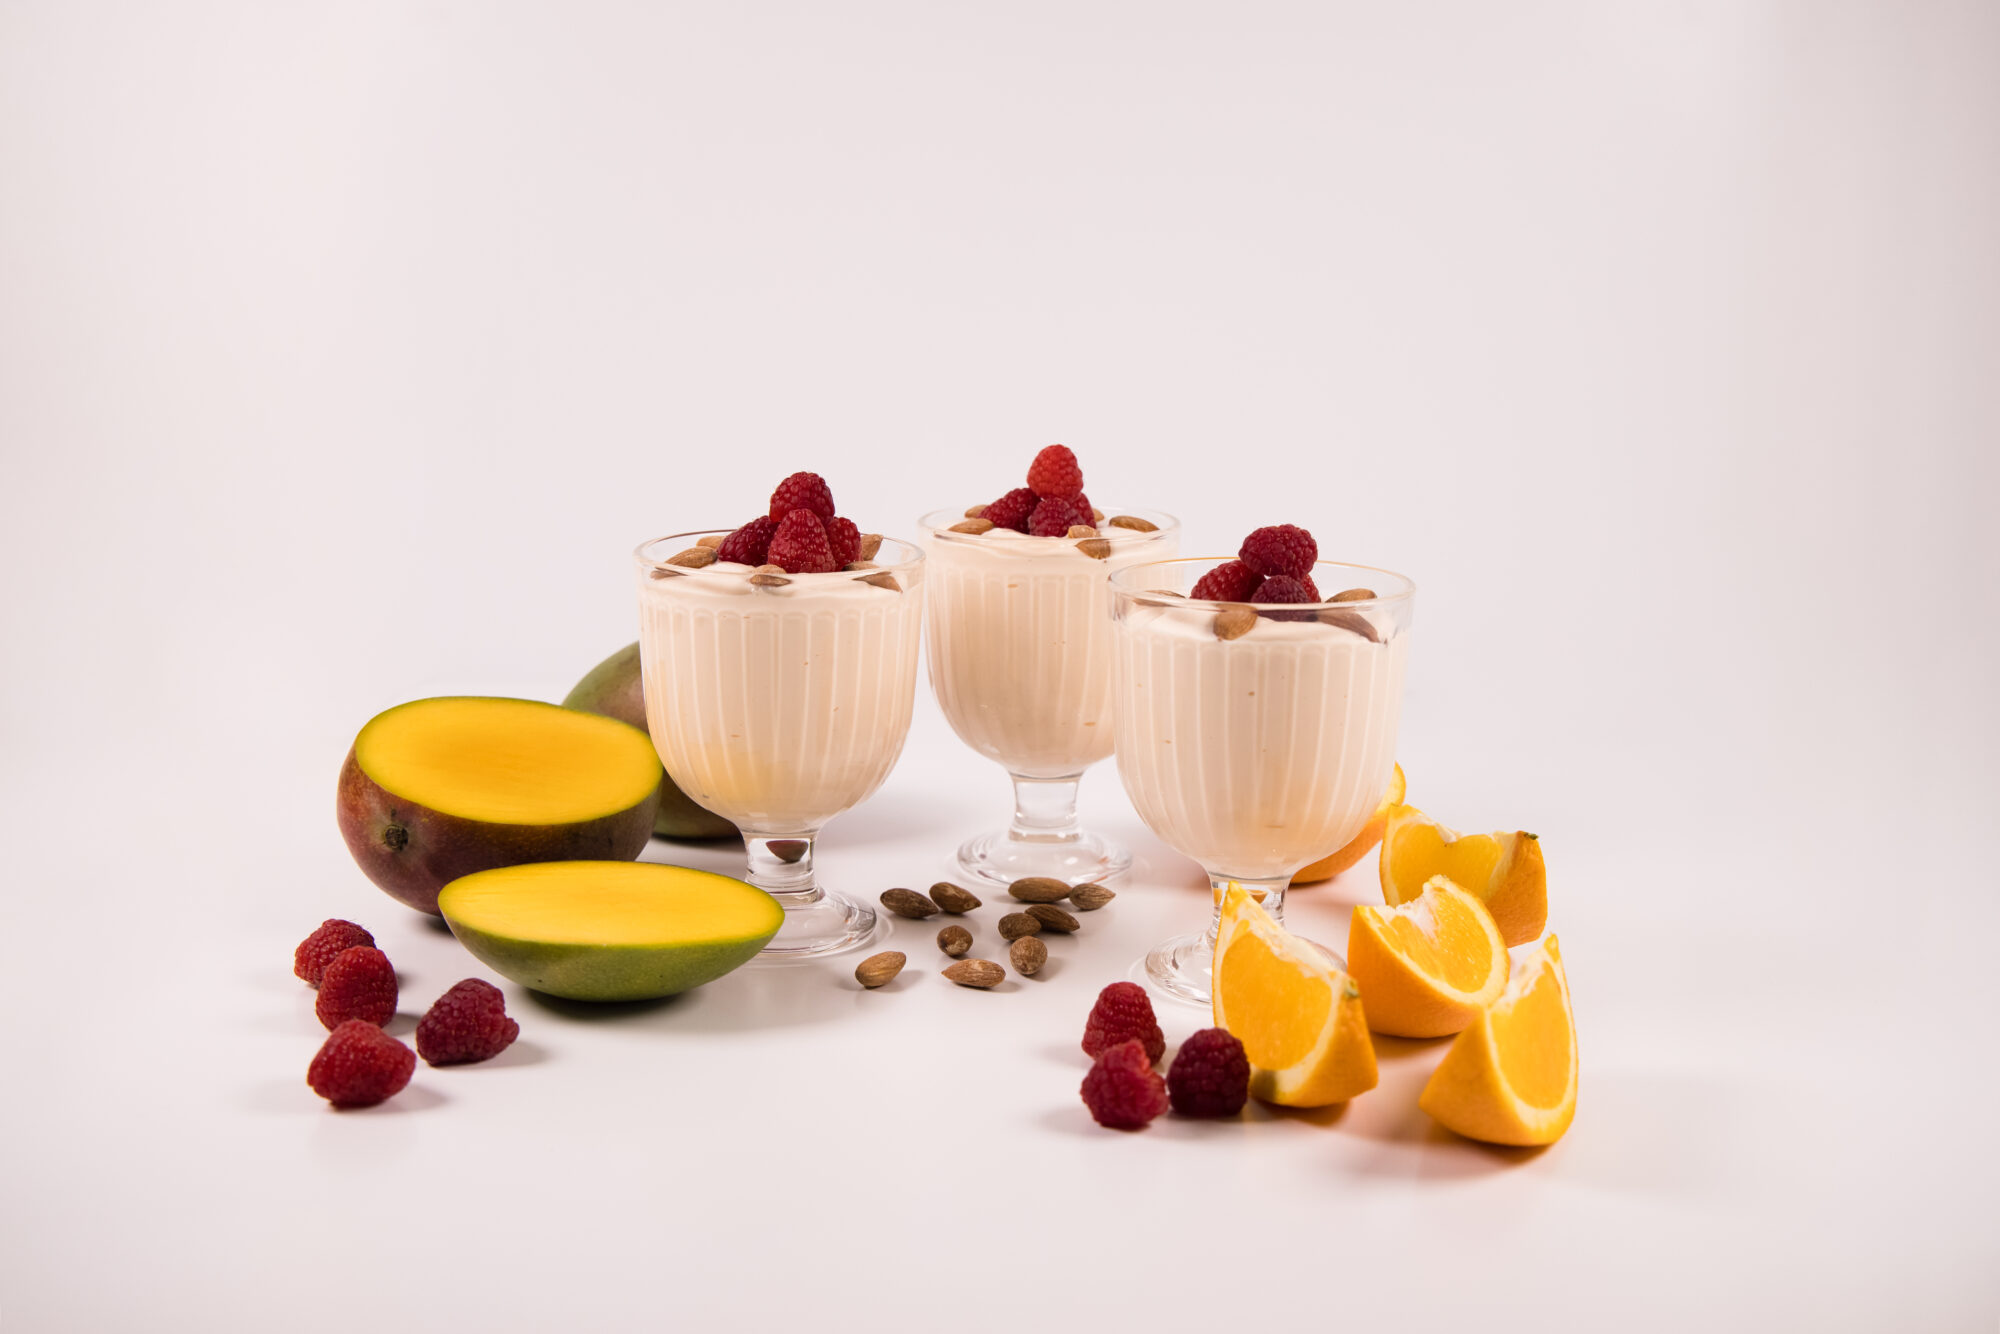 Three glass dessert cups filled with Mango Orange Yogurt, topped with almonds and raspberries. Raspberries and sliced oranges and mangoes surround the desserts.